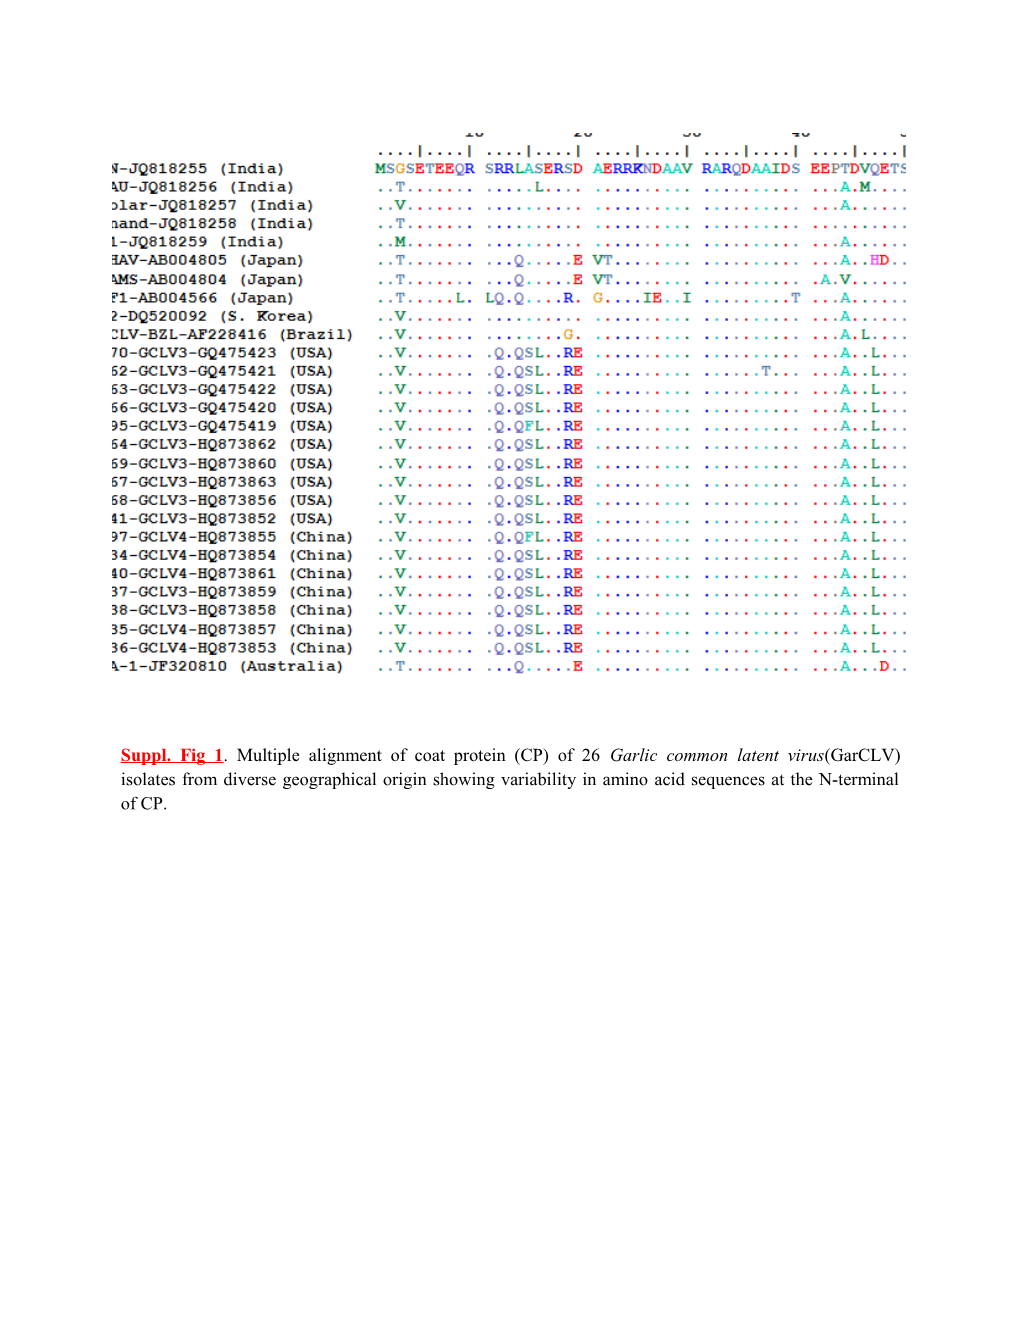 Suppl. Table 2. Different Conserved Domains of Coat Protein of Garlic Common Latent Virus